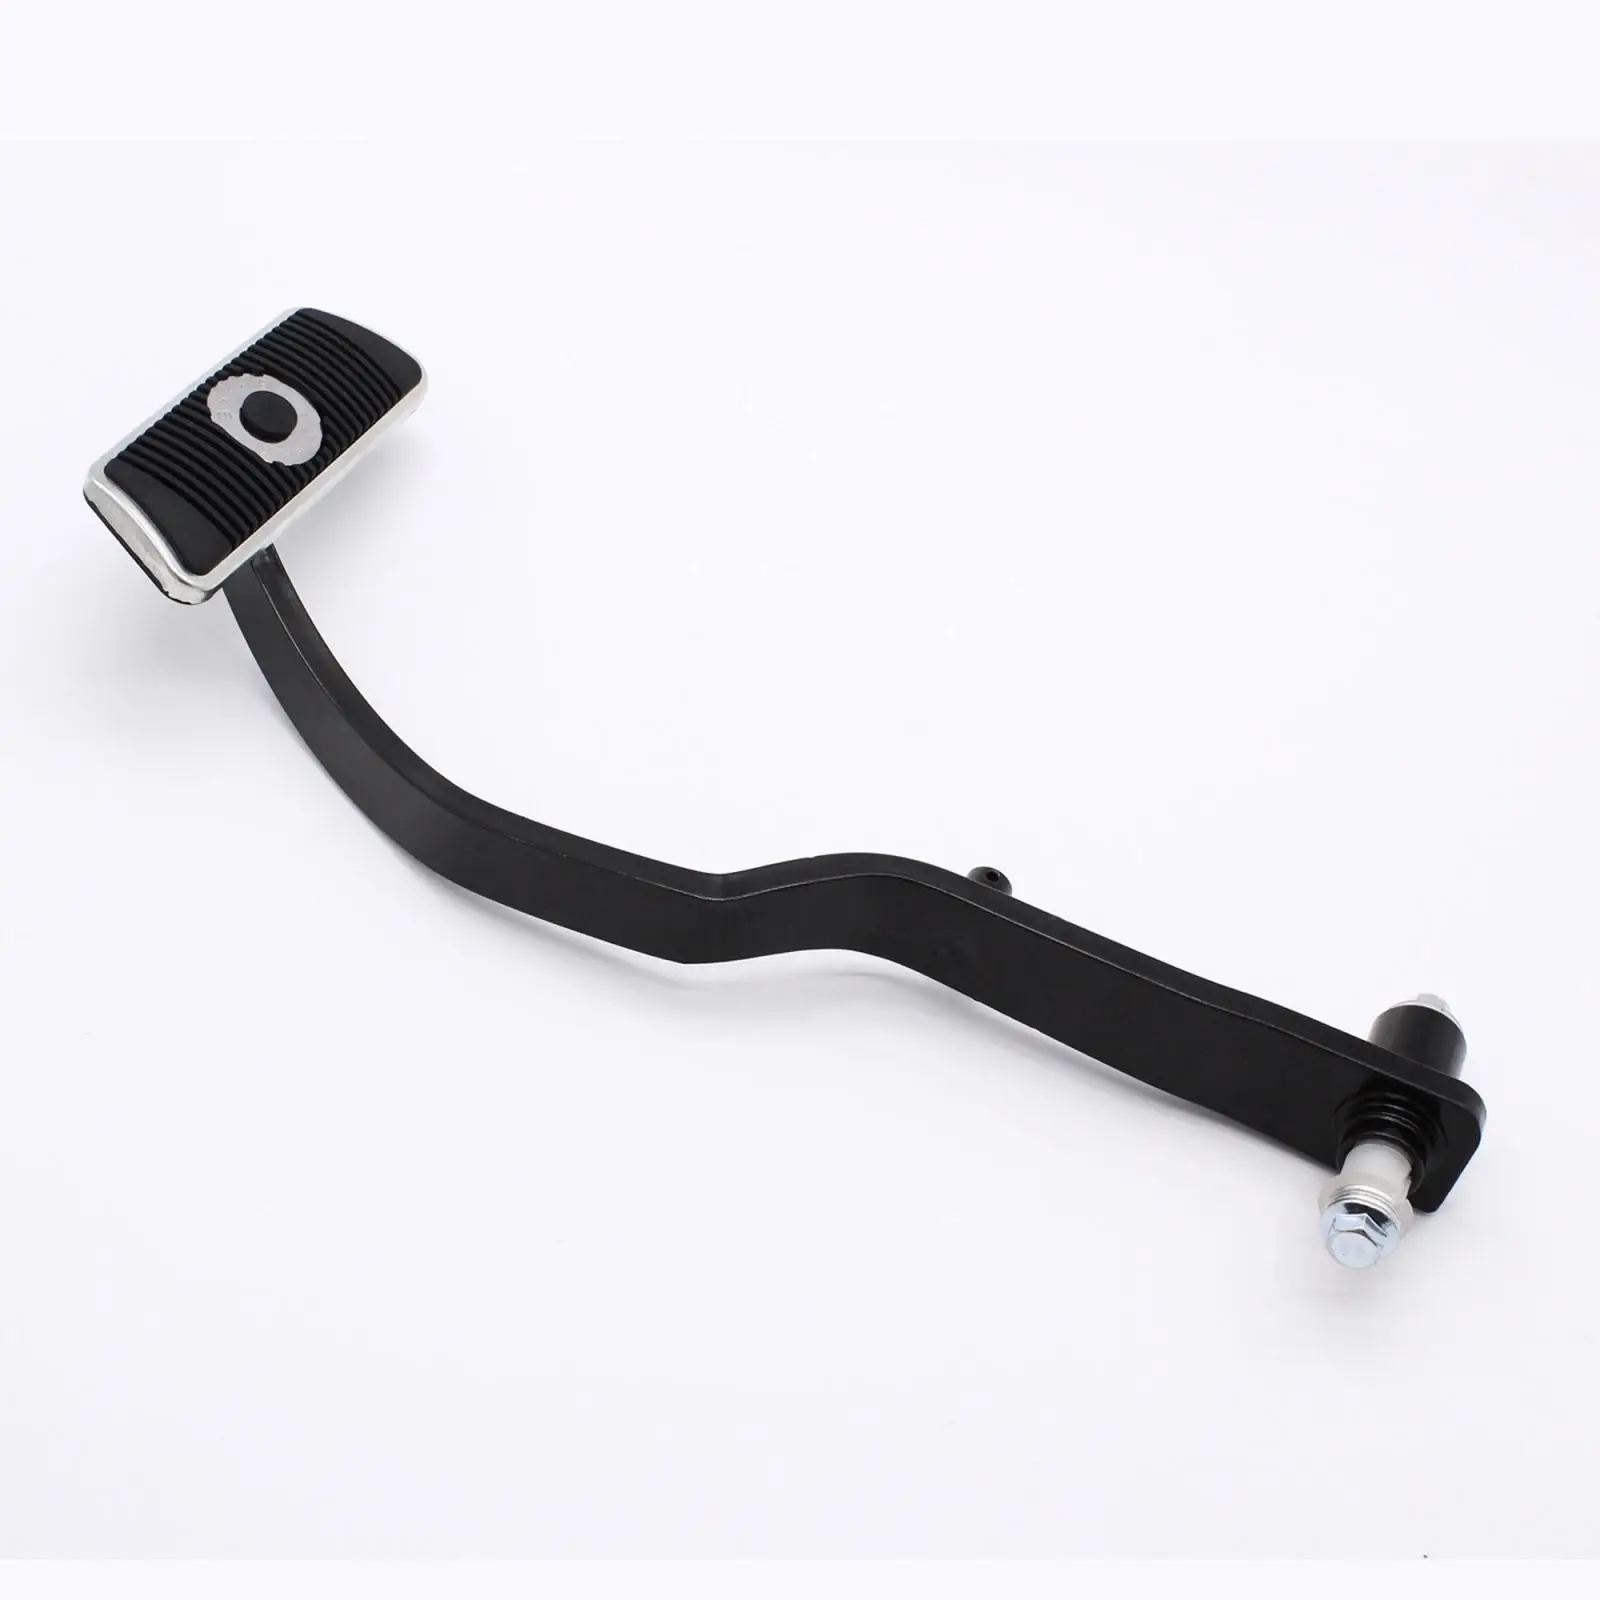 Automotive Brake Pedal Arm for Automatics Disc Brake B10520 Black for Ford Mustang 1967-69 High Quality Replacement